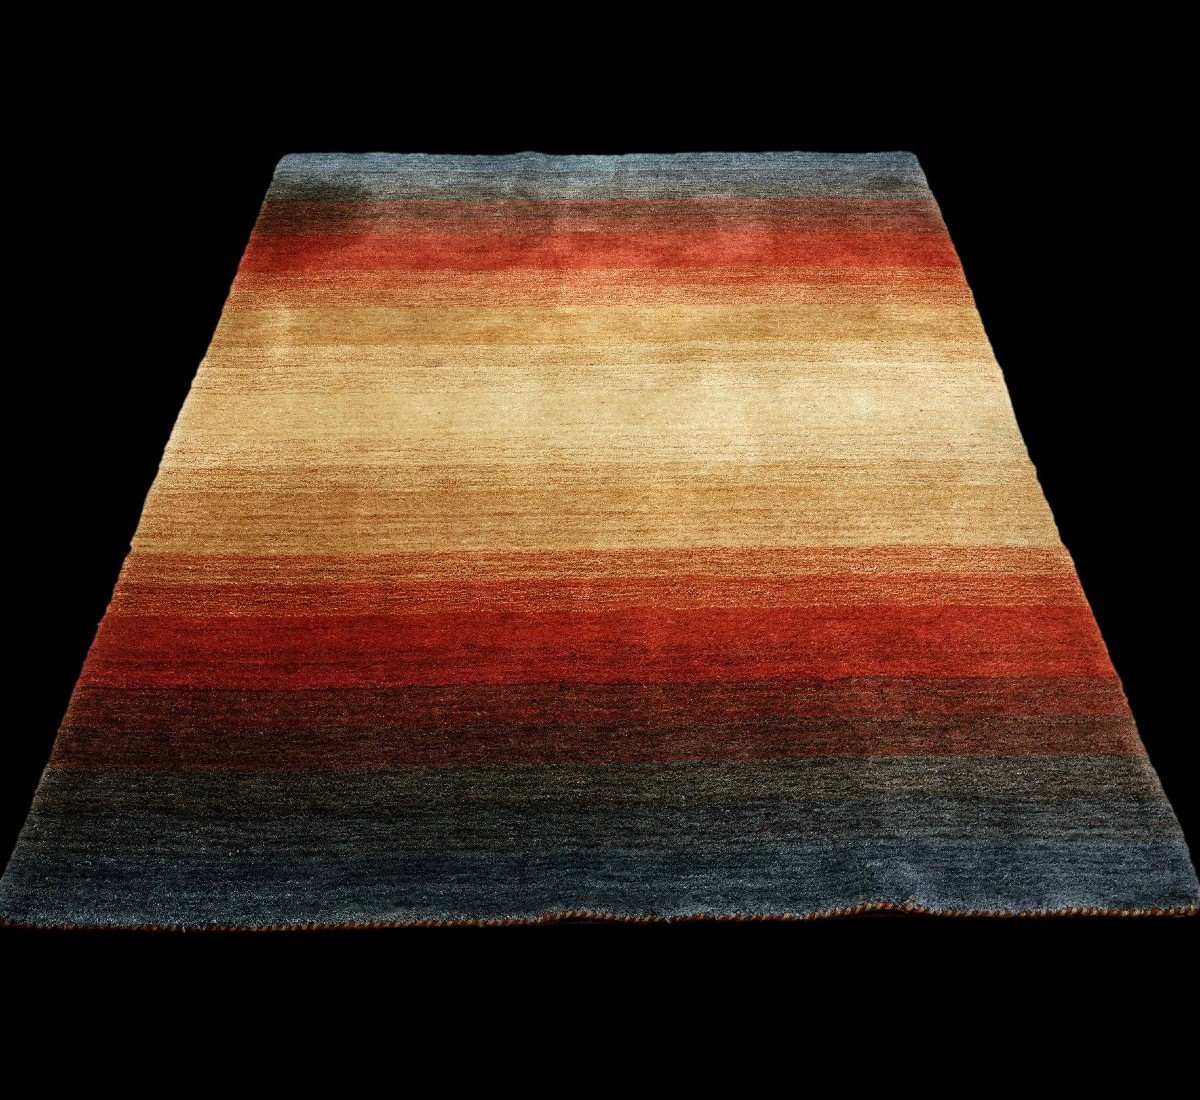 Gabbeh Rug, 148 X 196 Cm, Hand-knotted Wool, Iran, 1970-1980, Very Good Condition, Thickness 2.5 Cm-photo-2